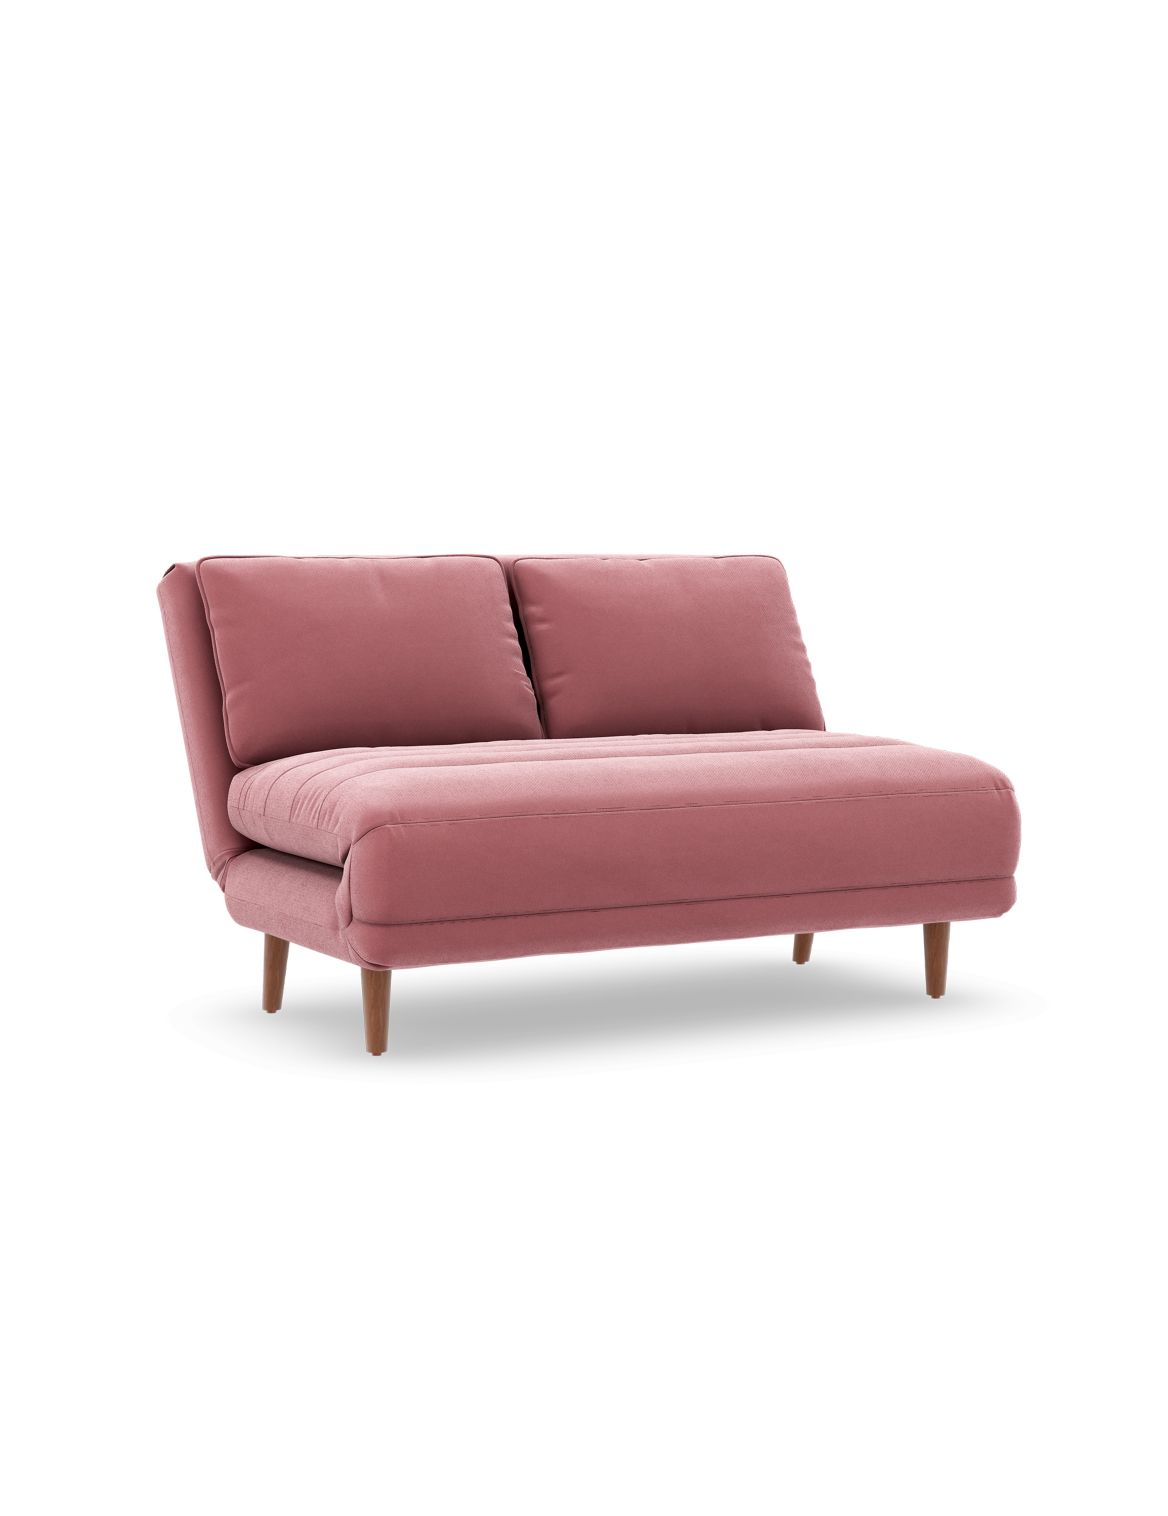 Logan Small Double Fold Out Sofa Bed pink